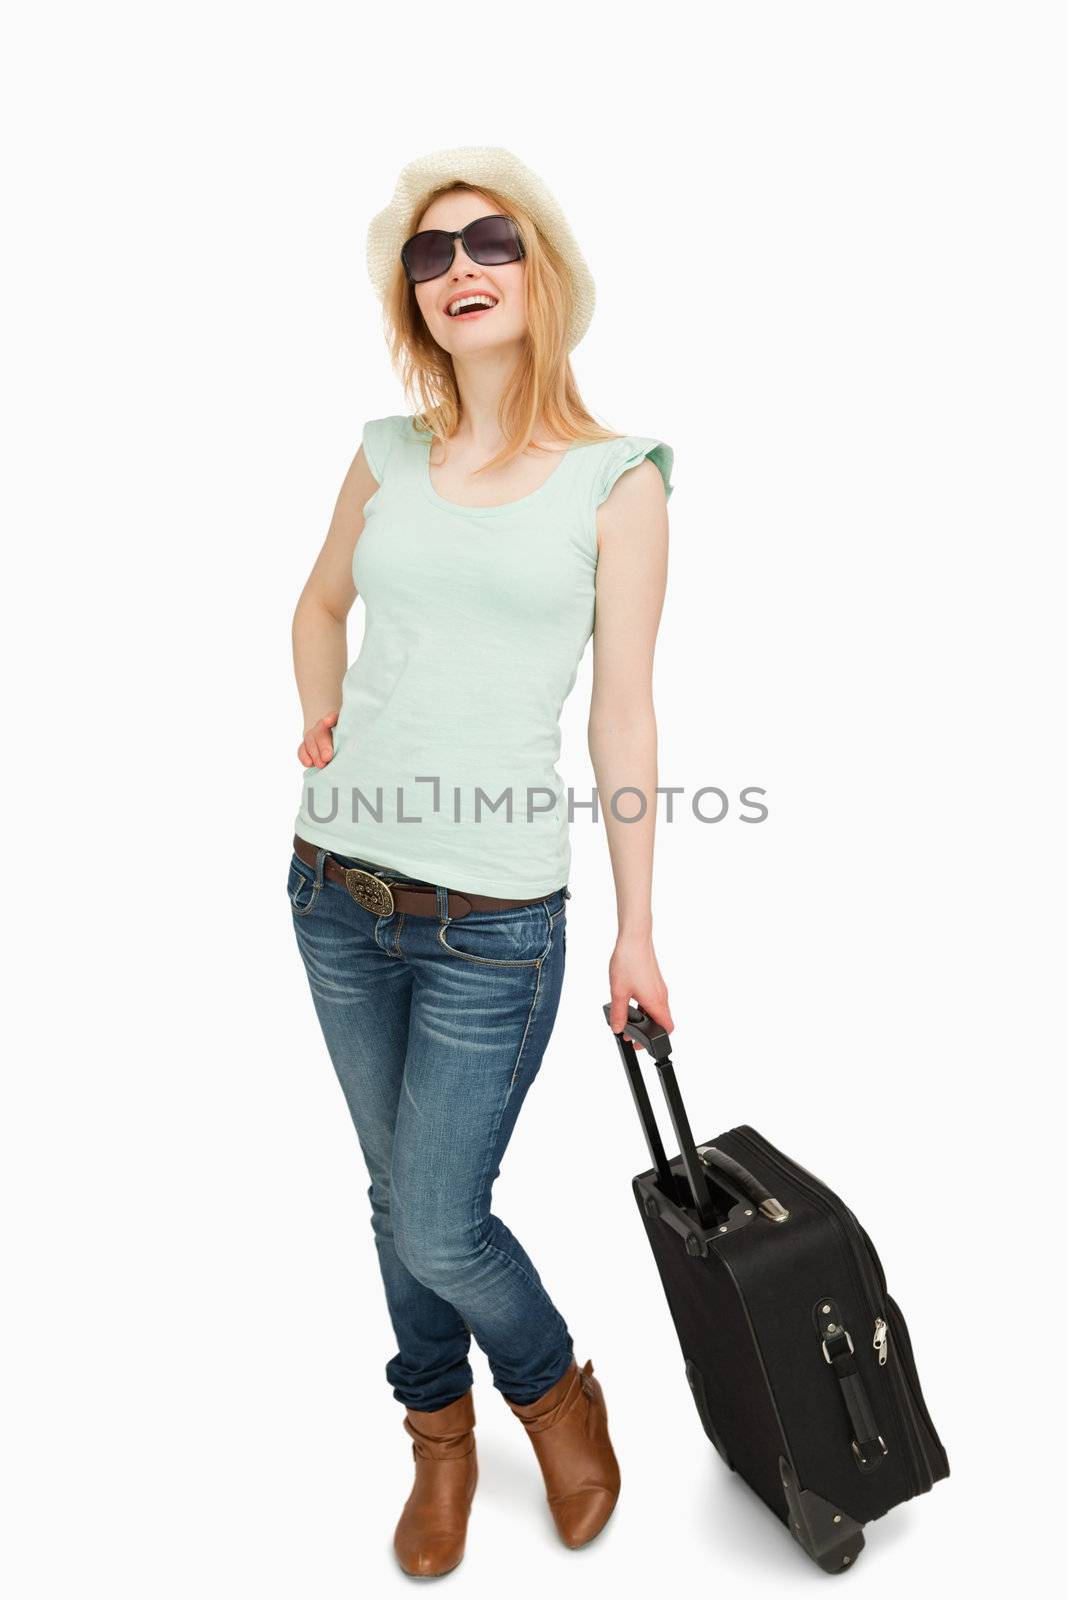 Young woman smiling while holding a suitcase against whitebackground